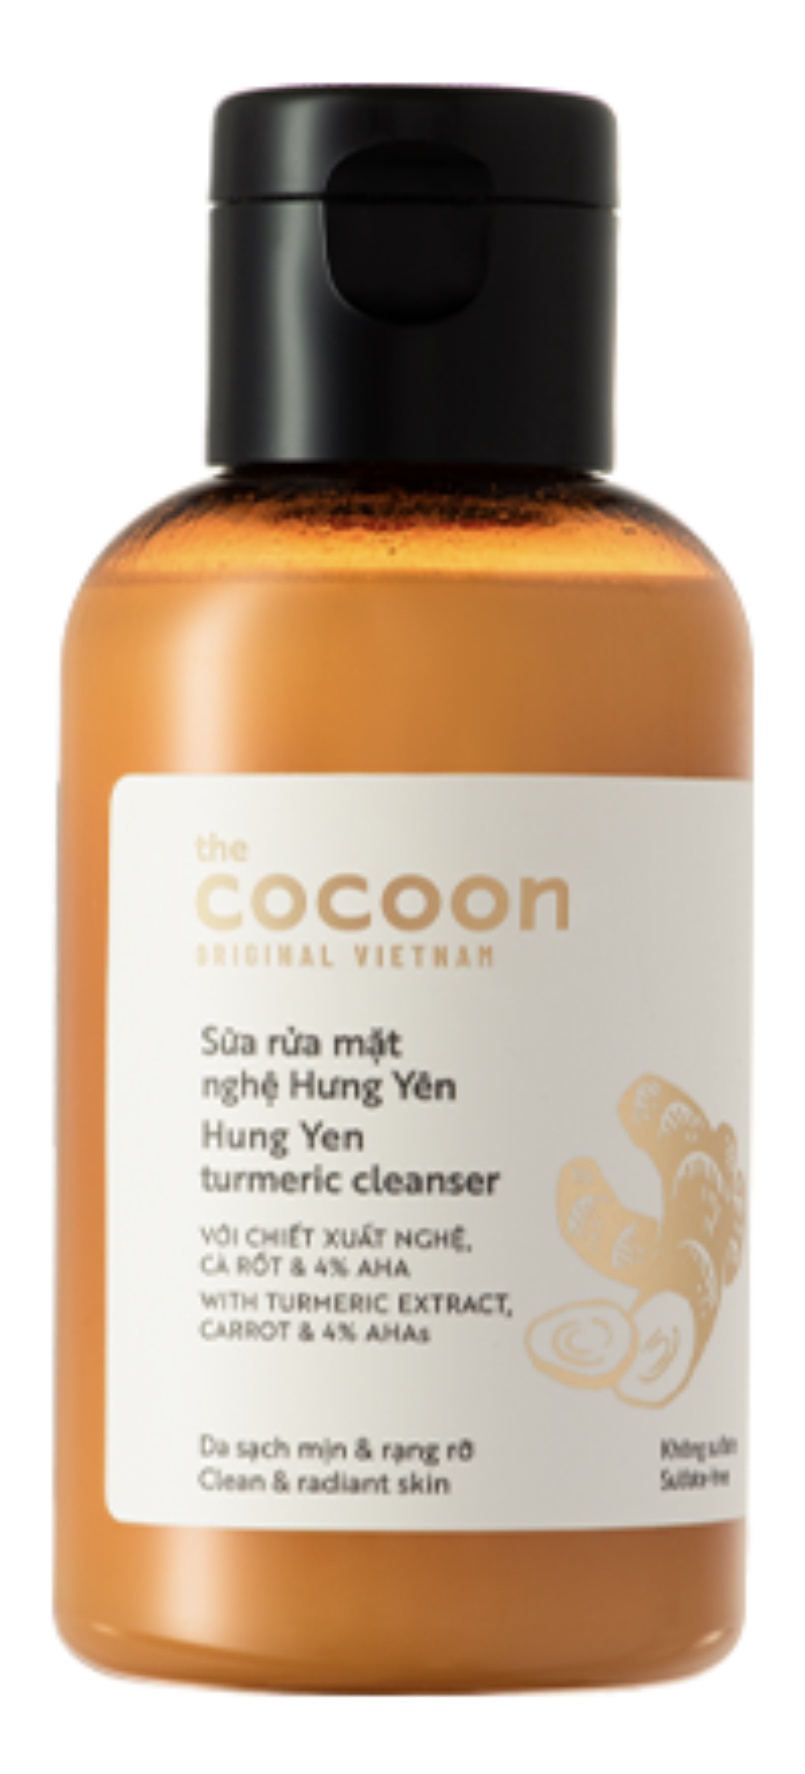 the Cocoon The Cocoon Hung Yen Turmeric Cleanser